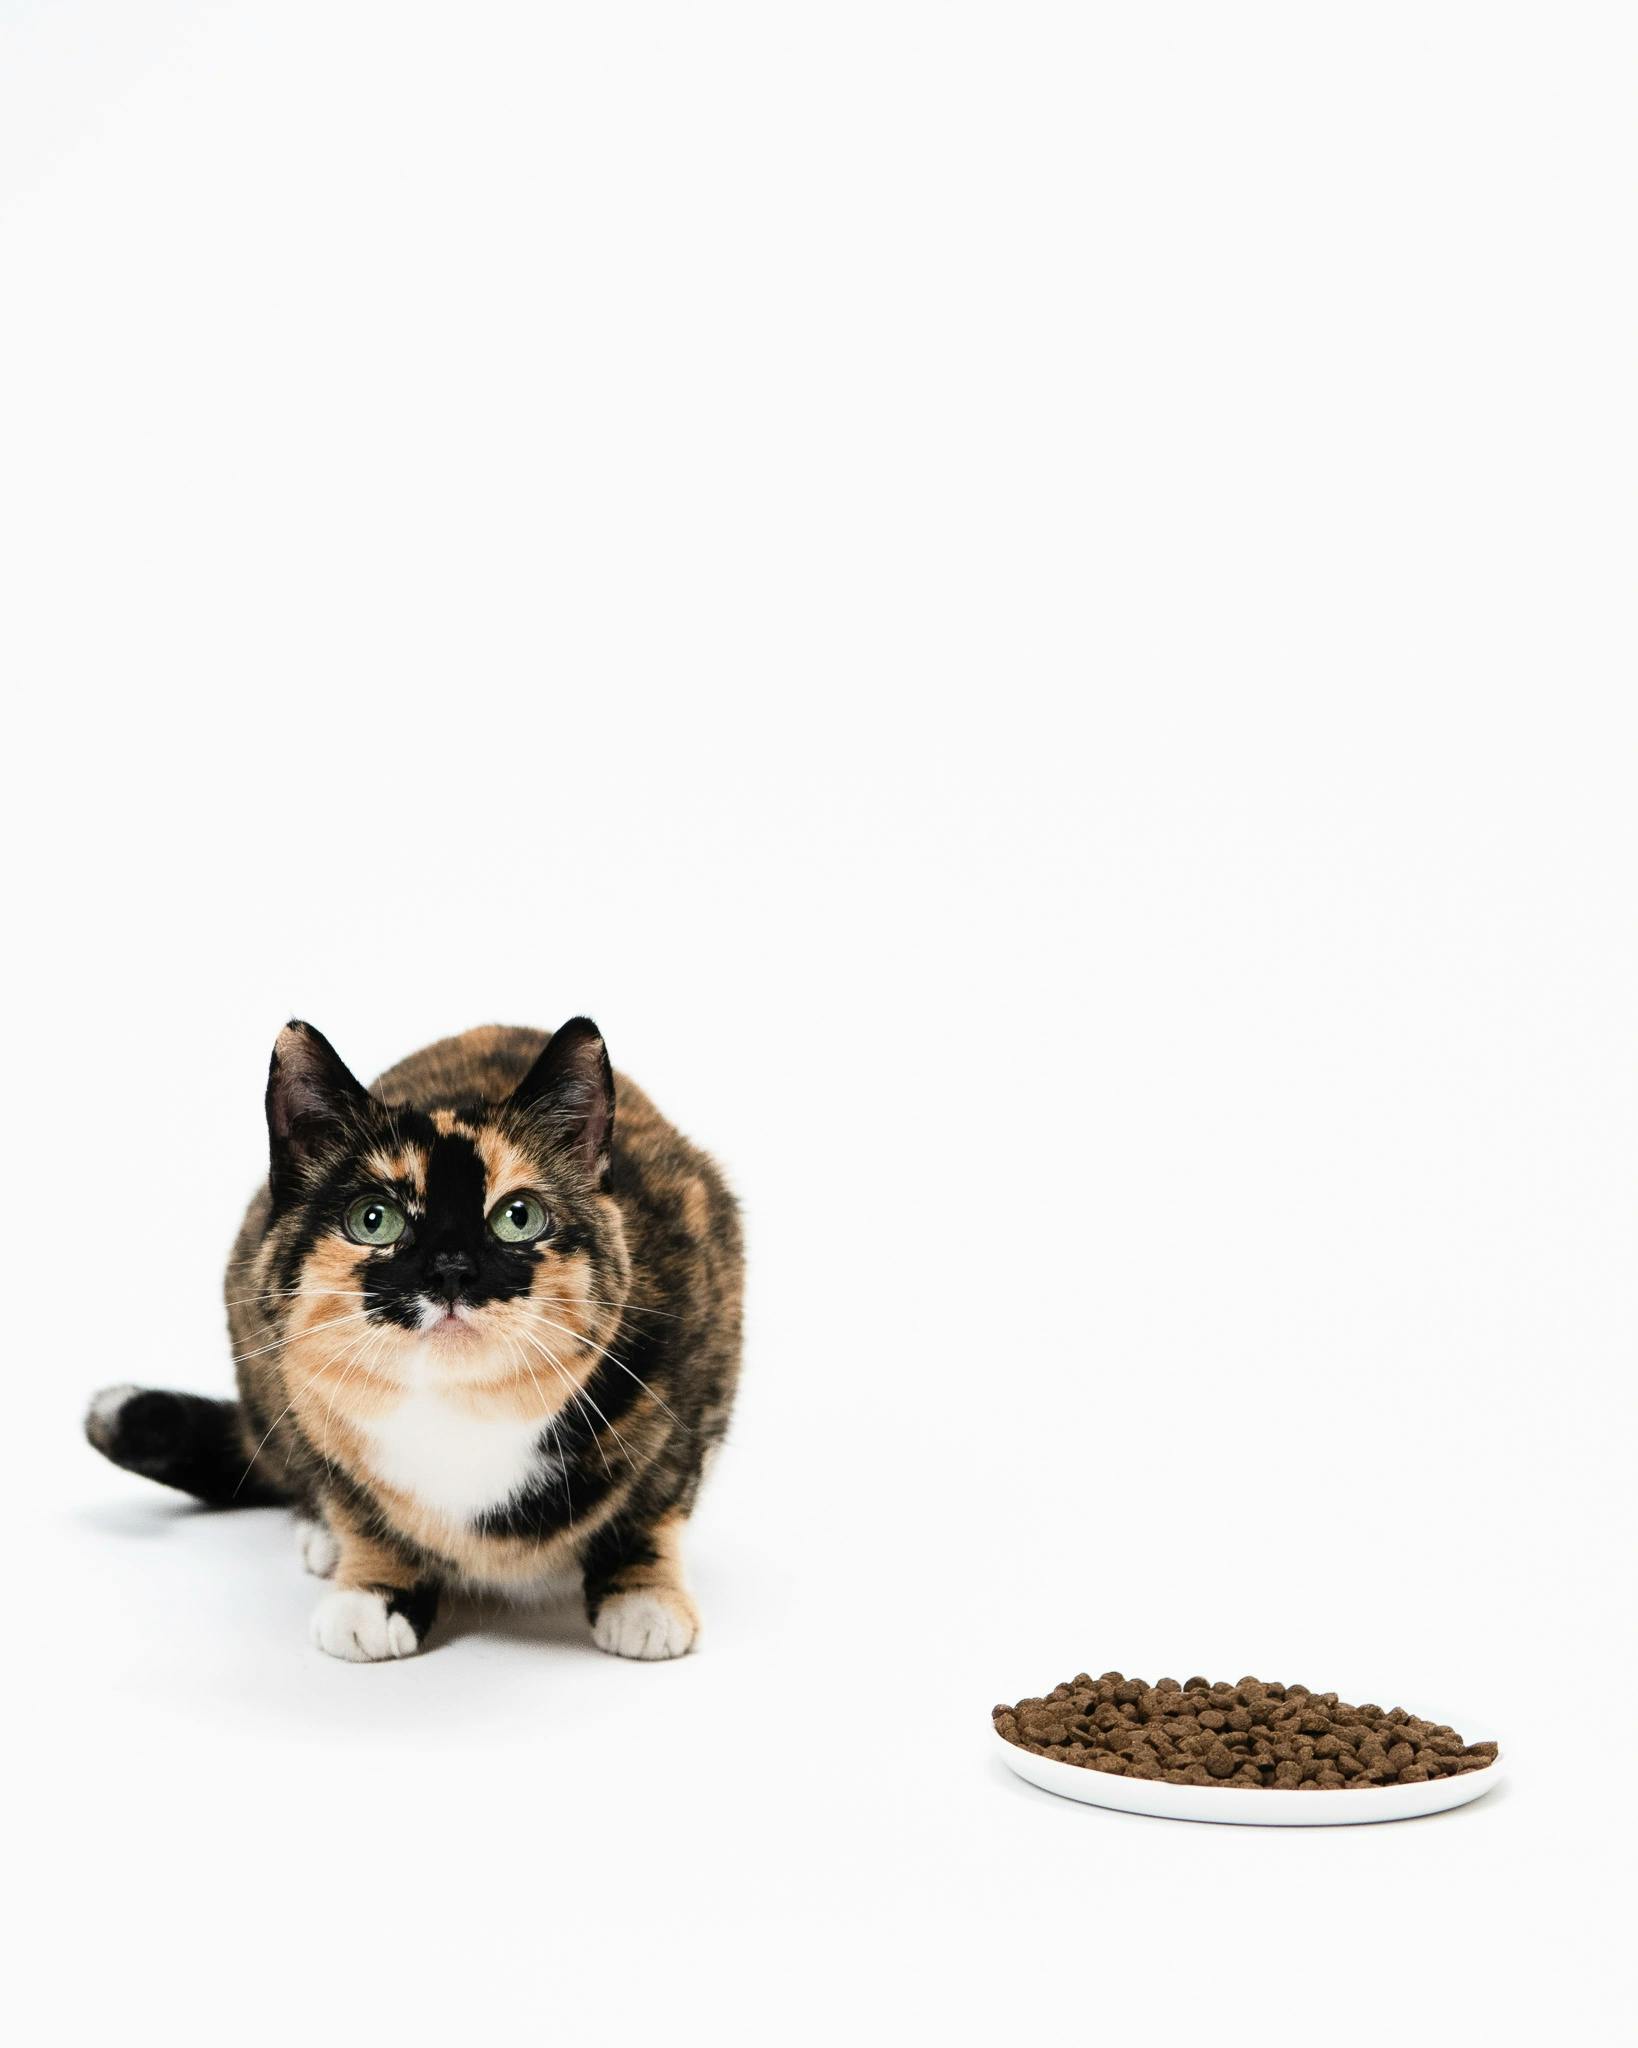 Cat food - insect-based